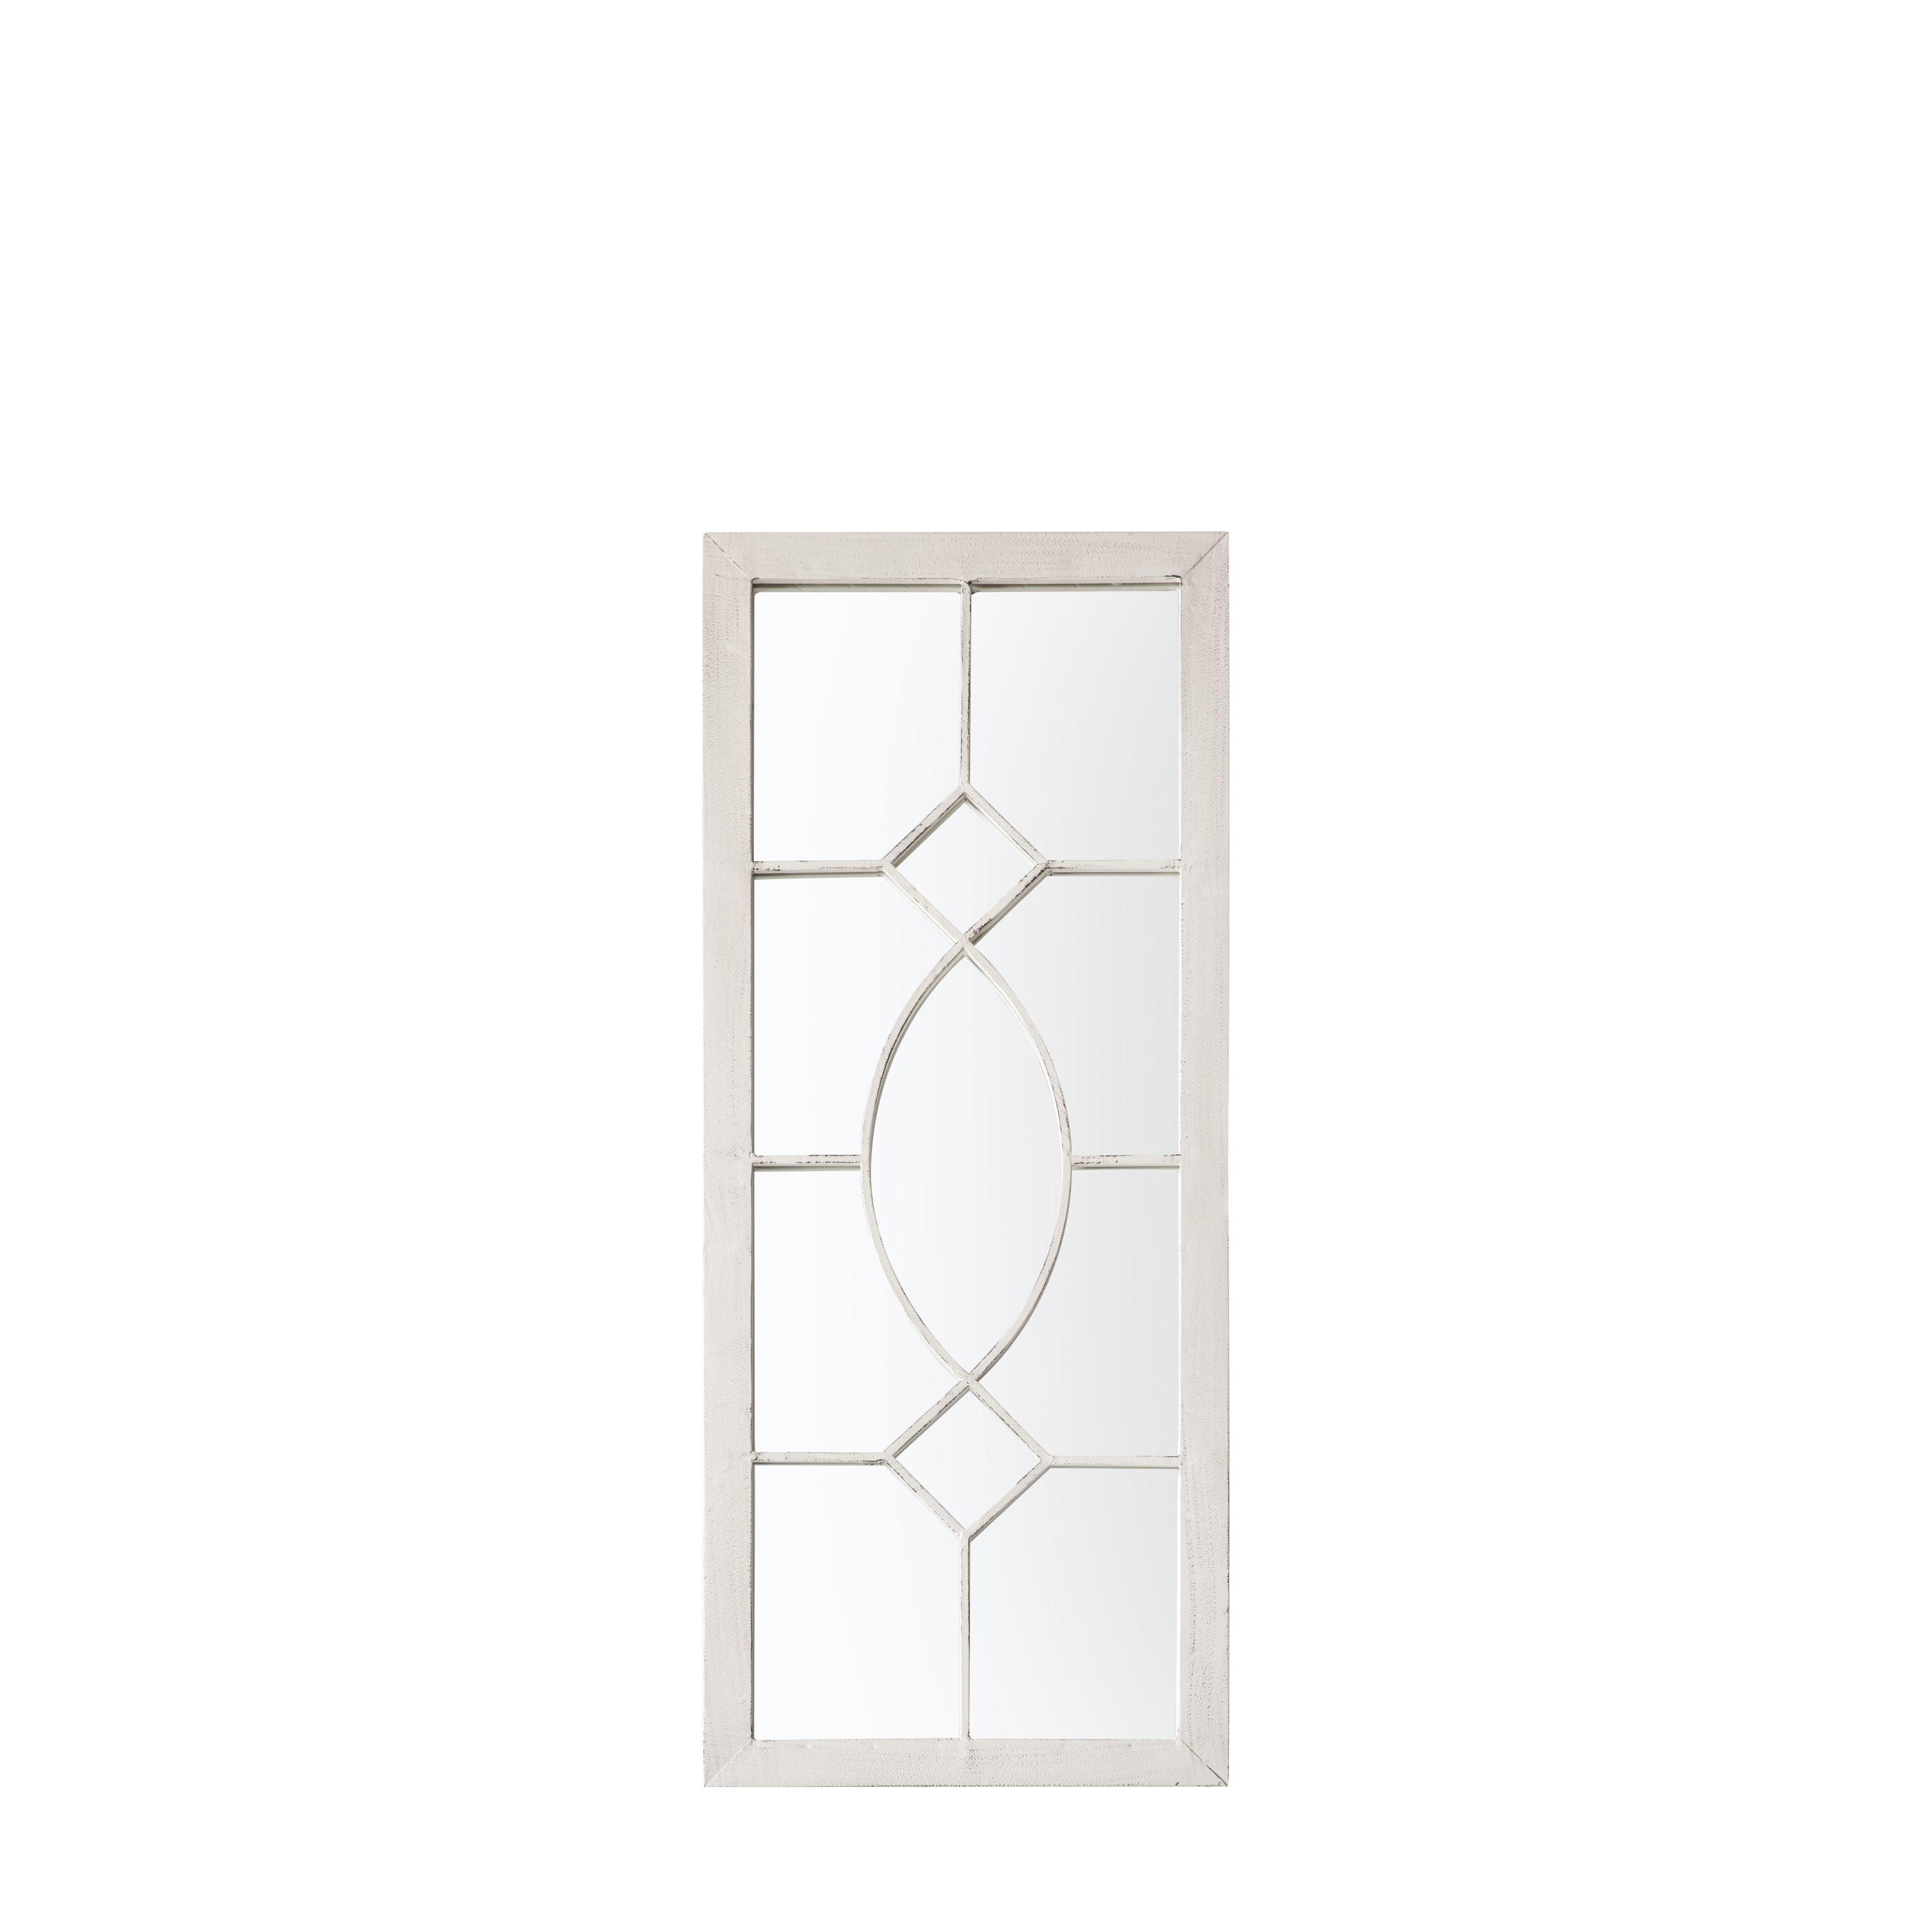 Chatham Outdoor Mirror - White - HUS & CO.